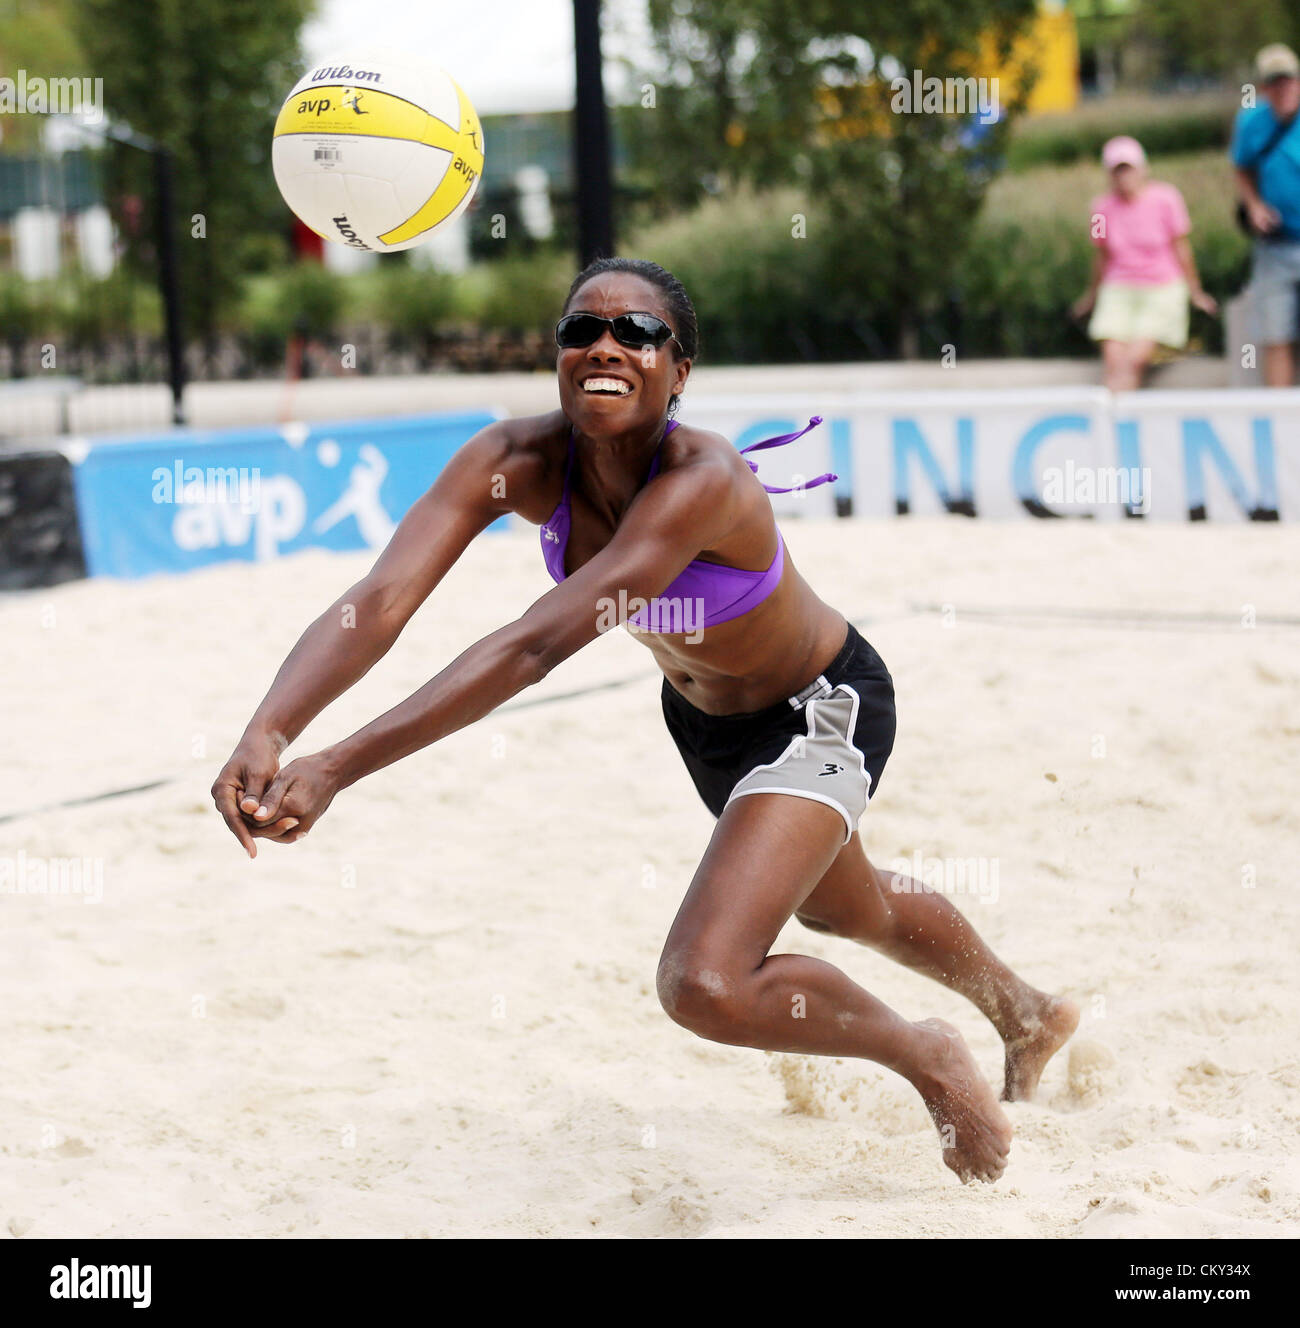 photography - Alamy 4 Volleyball Page woman - a images hi-res stock and